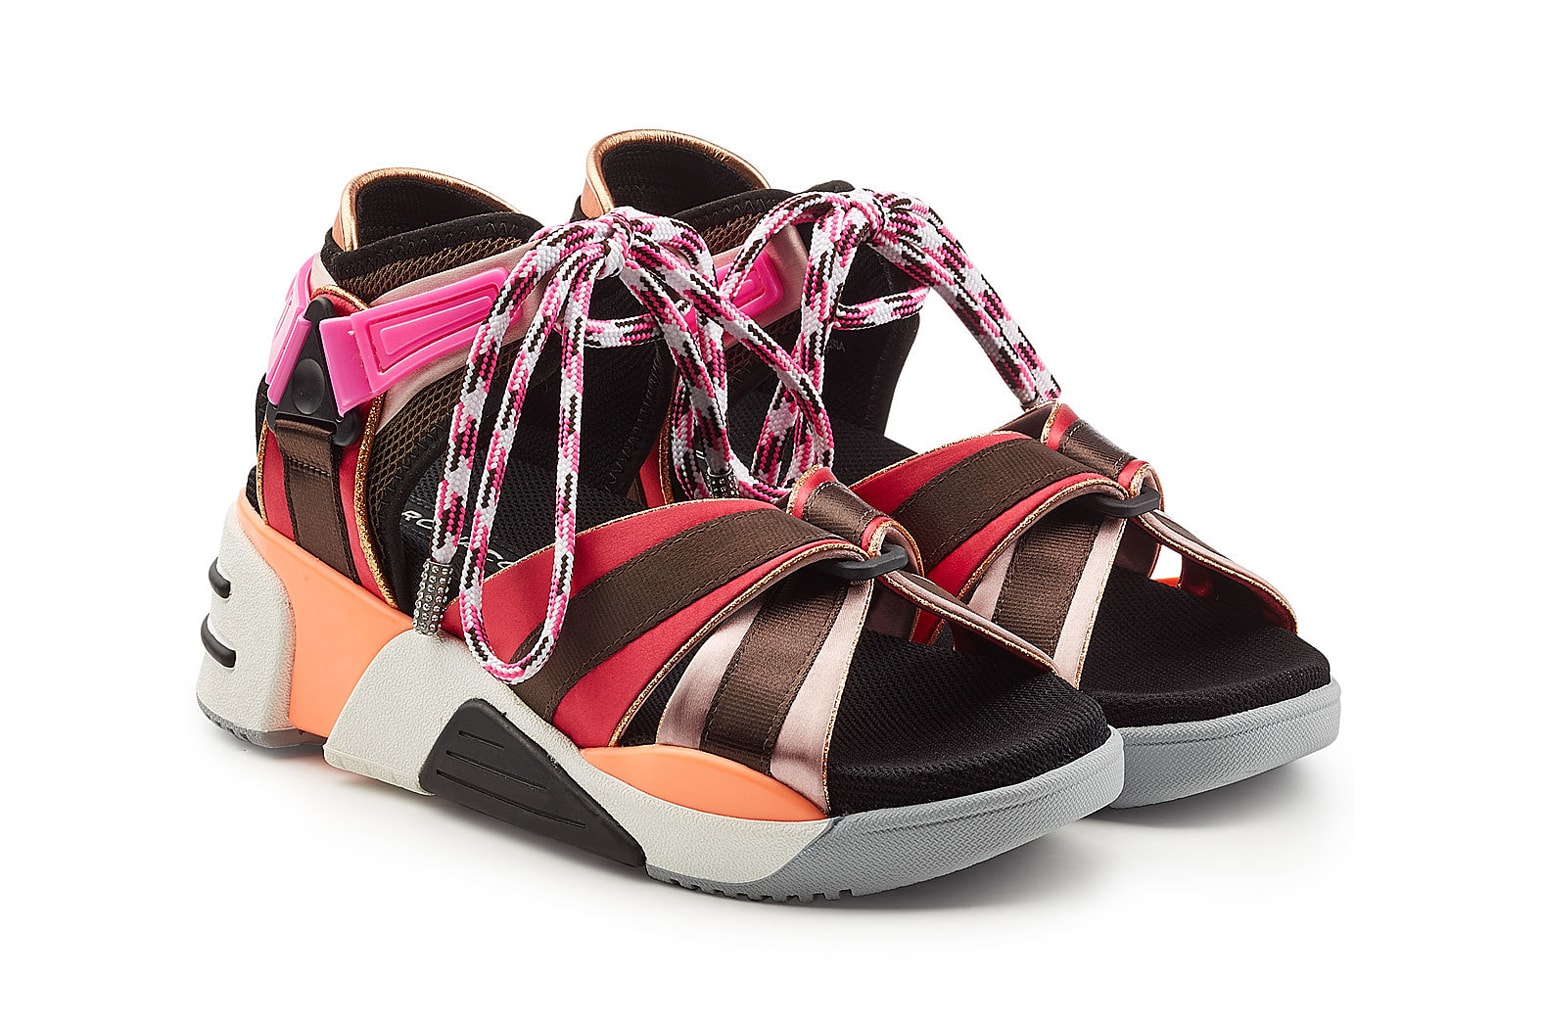 Marc Jacobs Somewhere Sport Sandals Multicolored